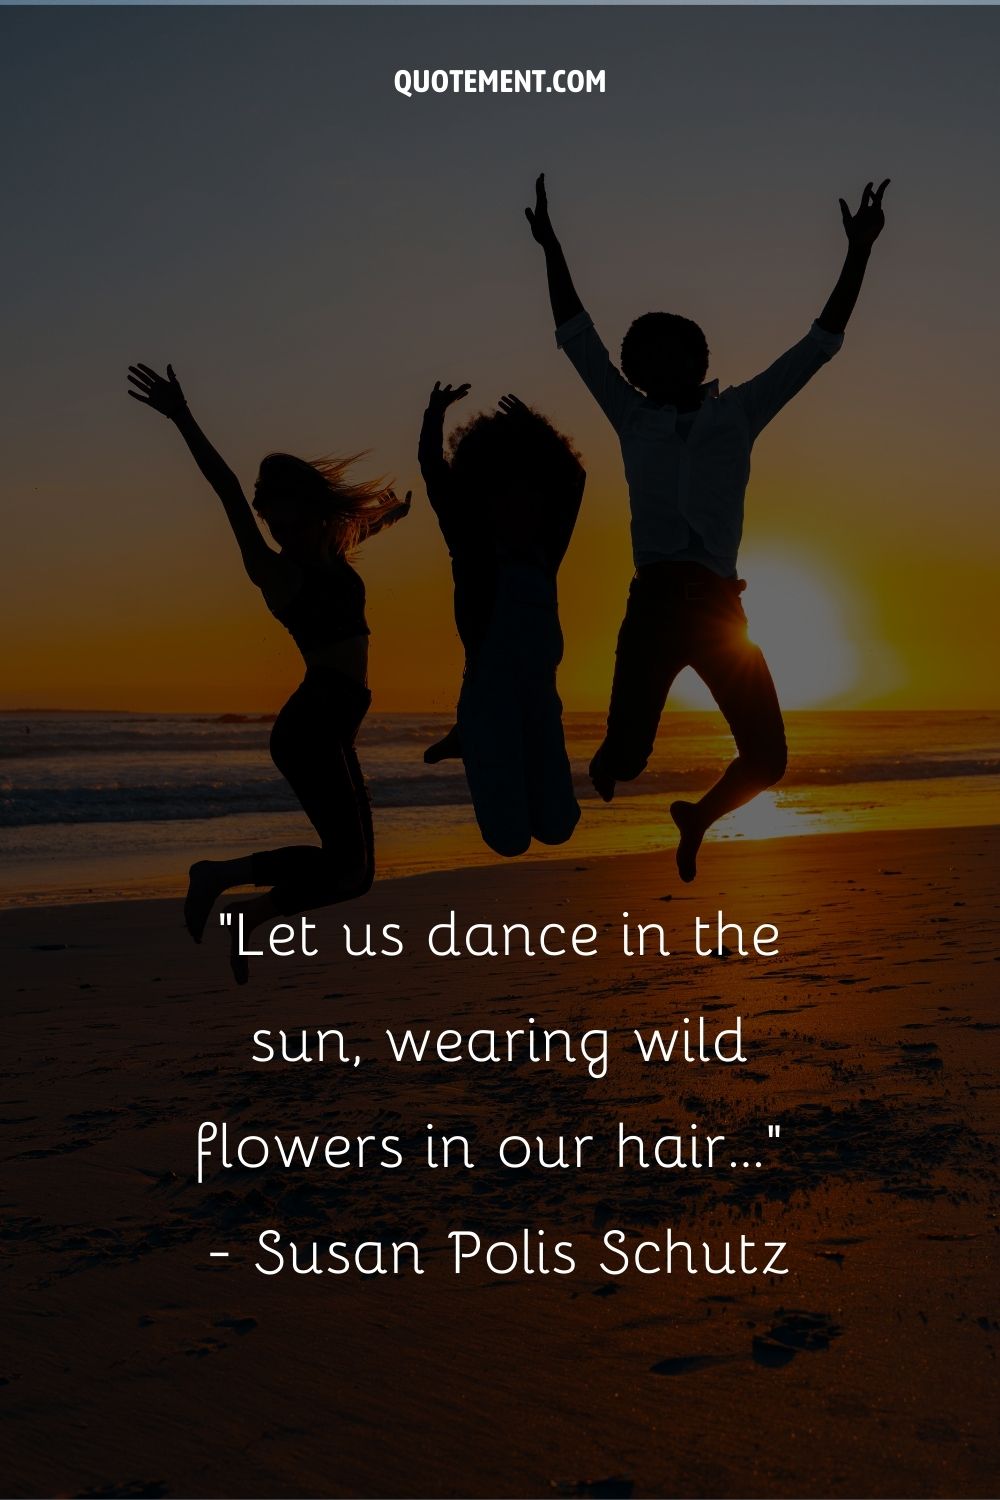 Let us dance in the sun, wearing wild flowers in our hair.